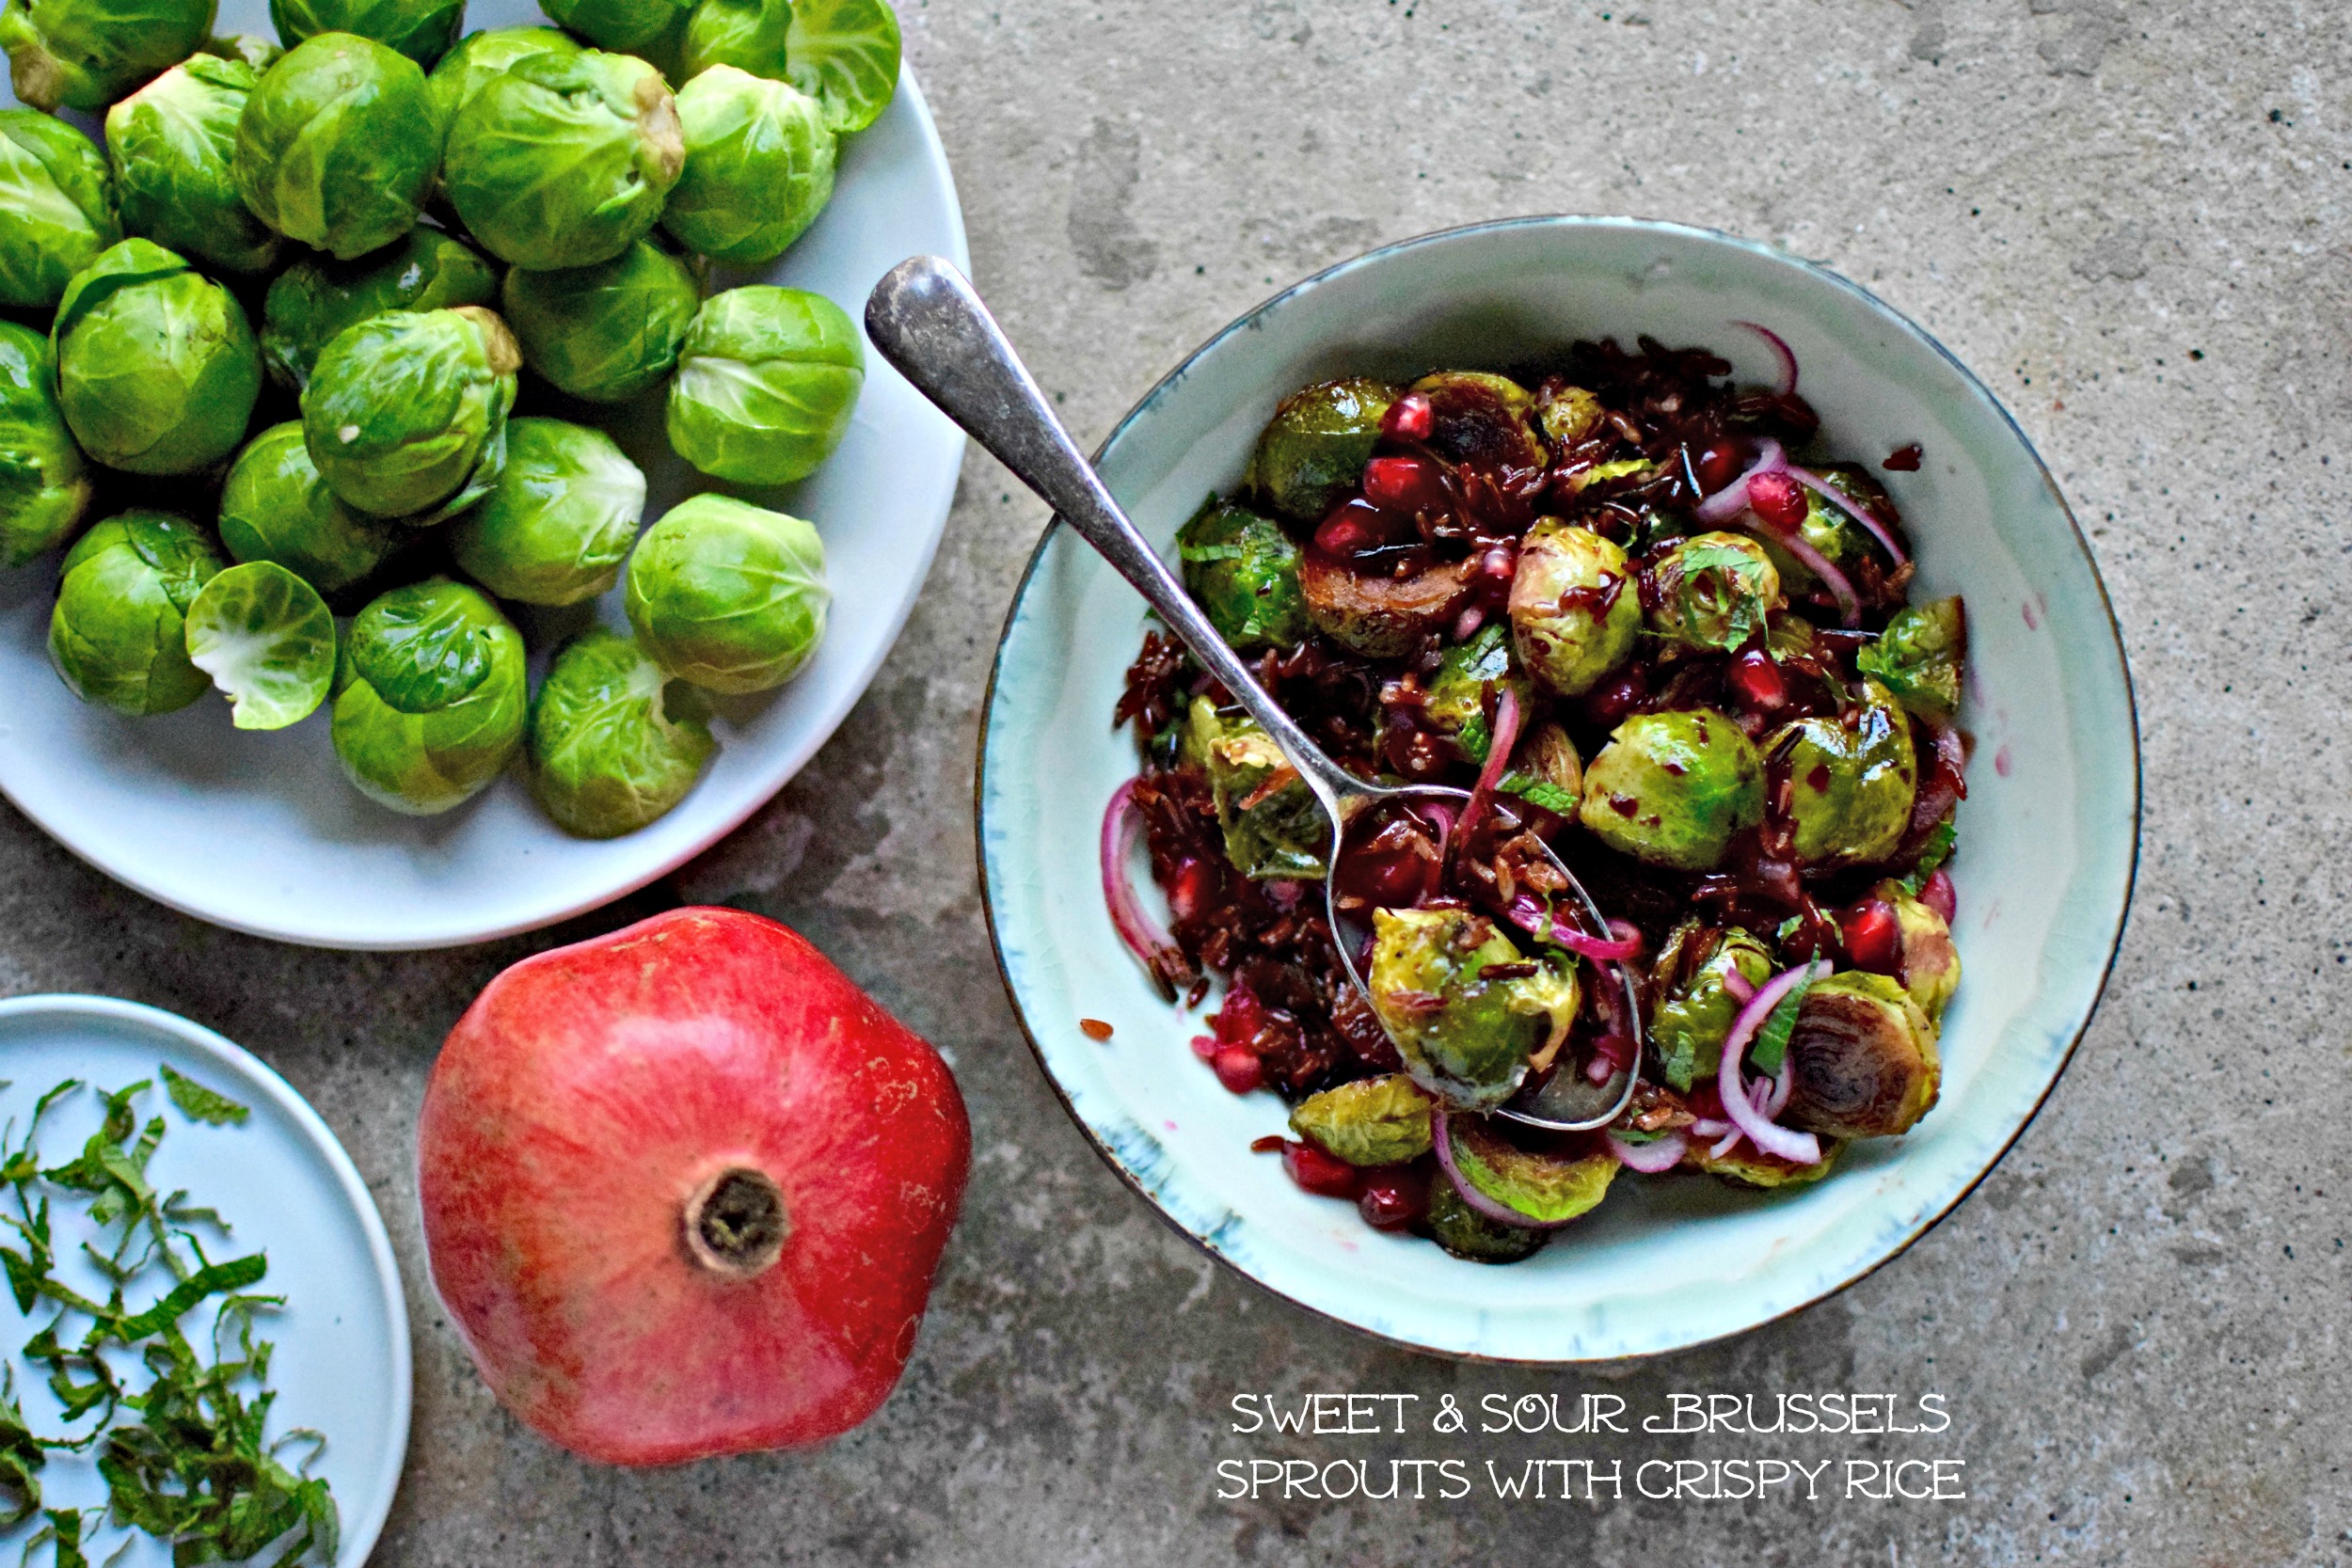 Pan-fried Brussels sprouts with tangy pomegranate molasses, mint, pickled red onion and crispy red & wild rice: because side dishes don't need to be boring. Perfect for the festive table, or as a perky midweek addition to a meal. A vegan and anti-inflammatory recipe.